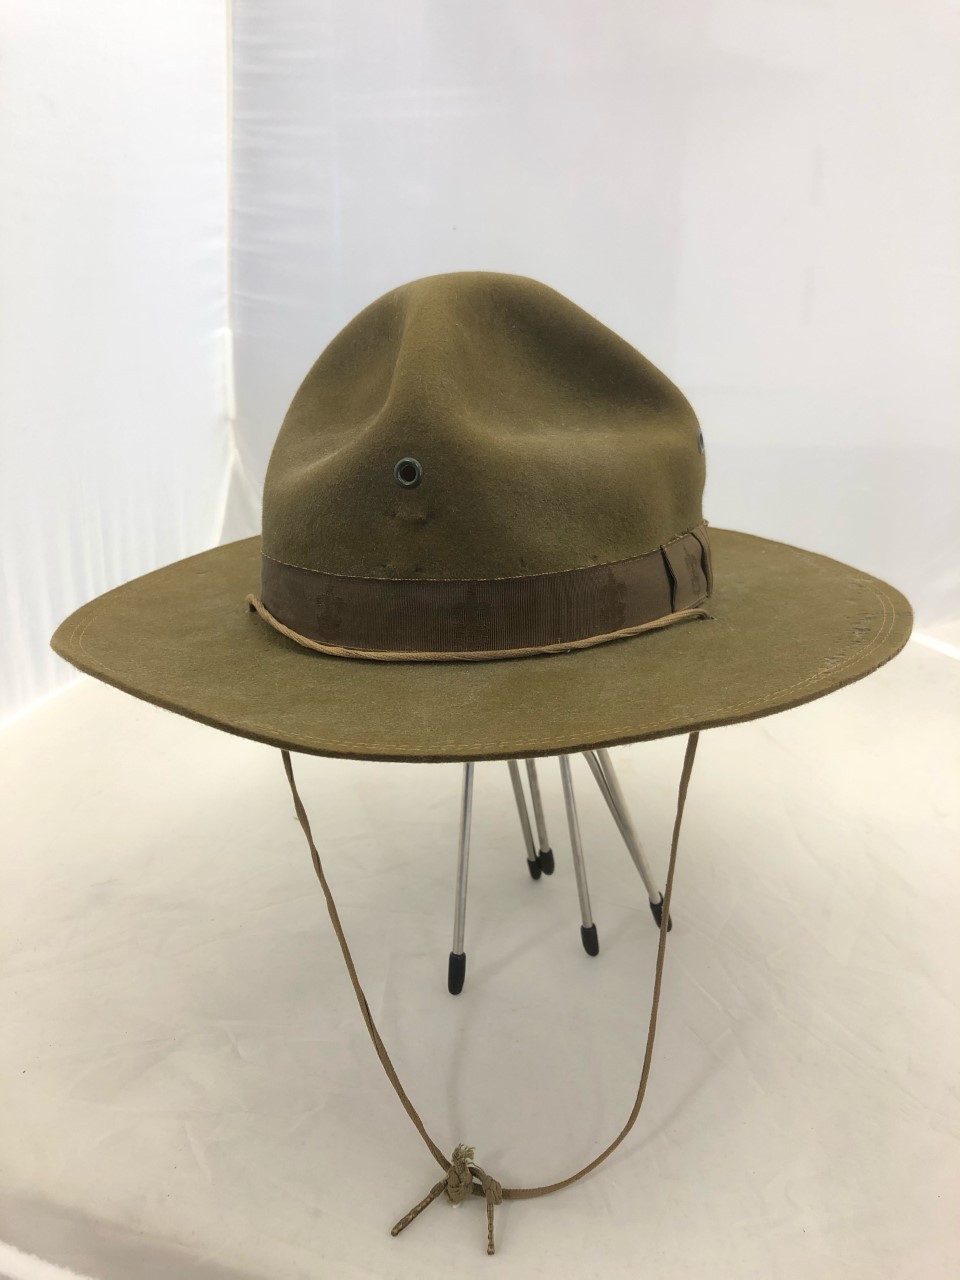 BSA Campaign Hat, Adult - THIS ITEM IS NO LONGER AVAILABLE - BSA